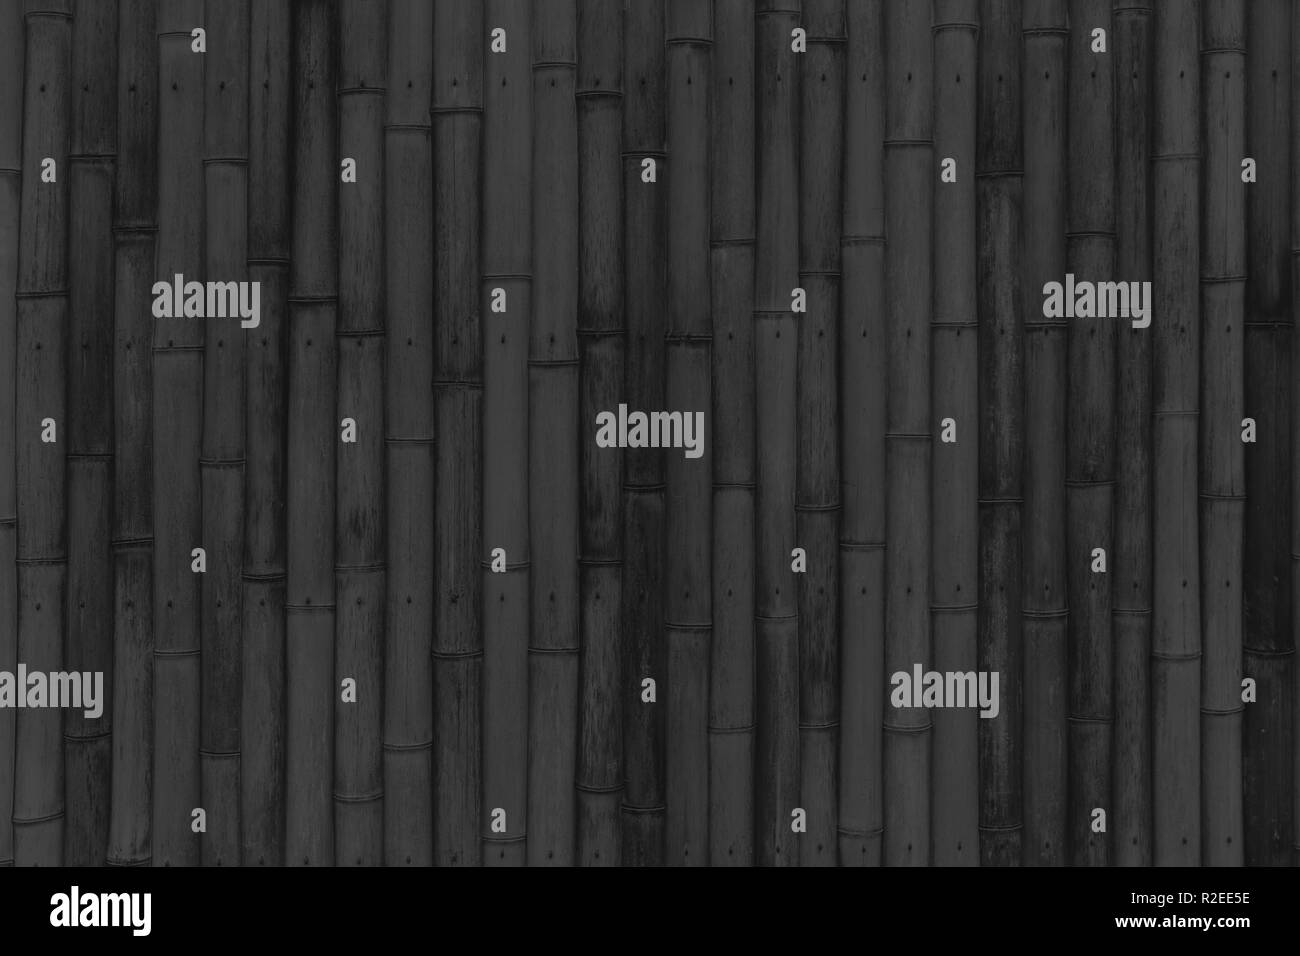 black wood dark background texture bamboo wooden wall blank for design. Stock Photo